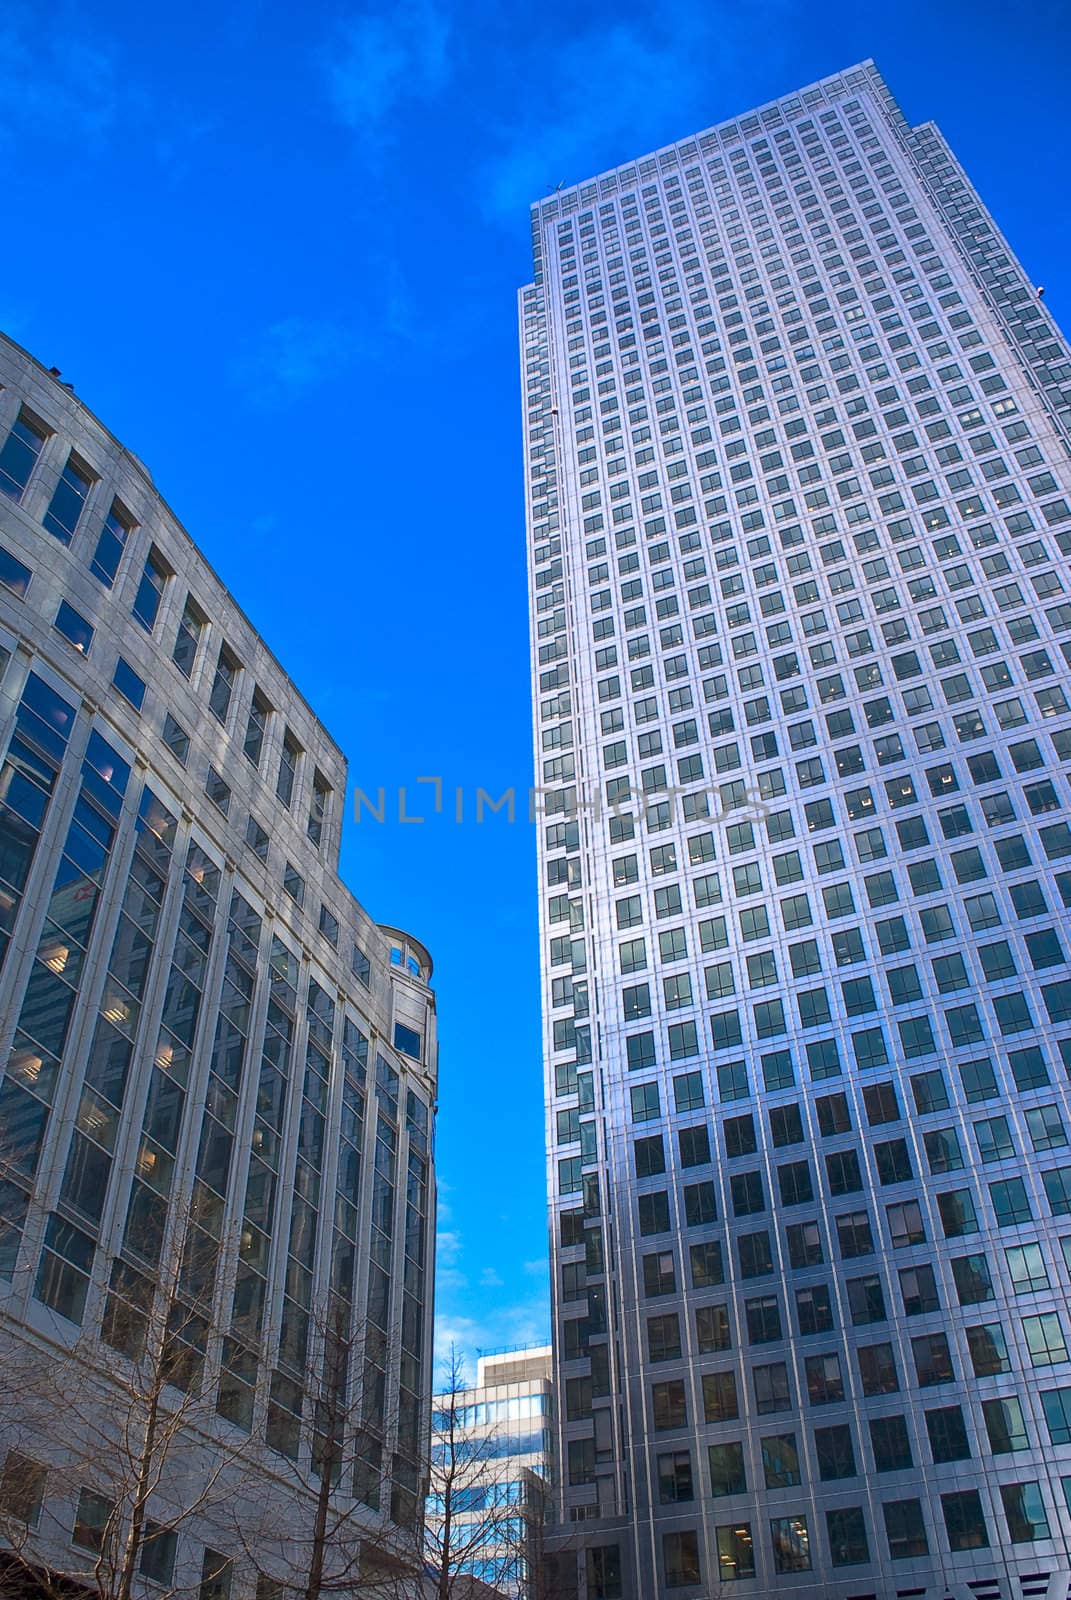 Skyscrapers against blue sky with clouds